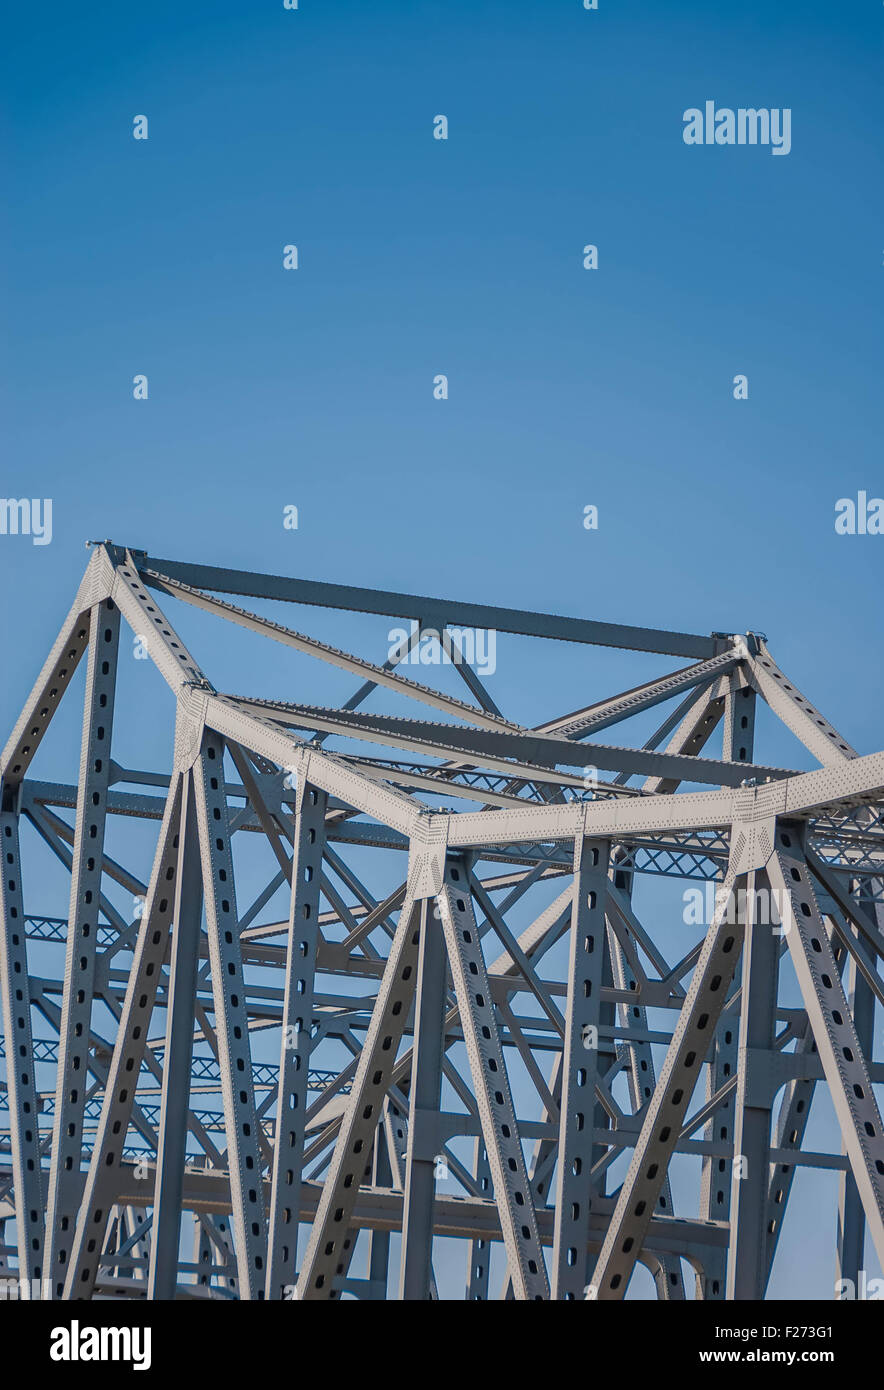 Steel Bridge support and details. steel structure or Steel truss design close-up Stock Photo